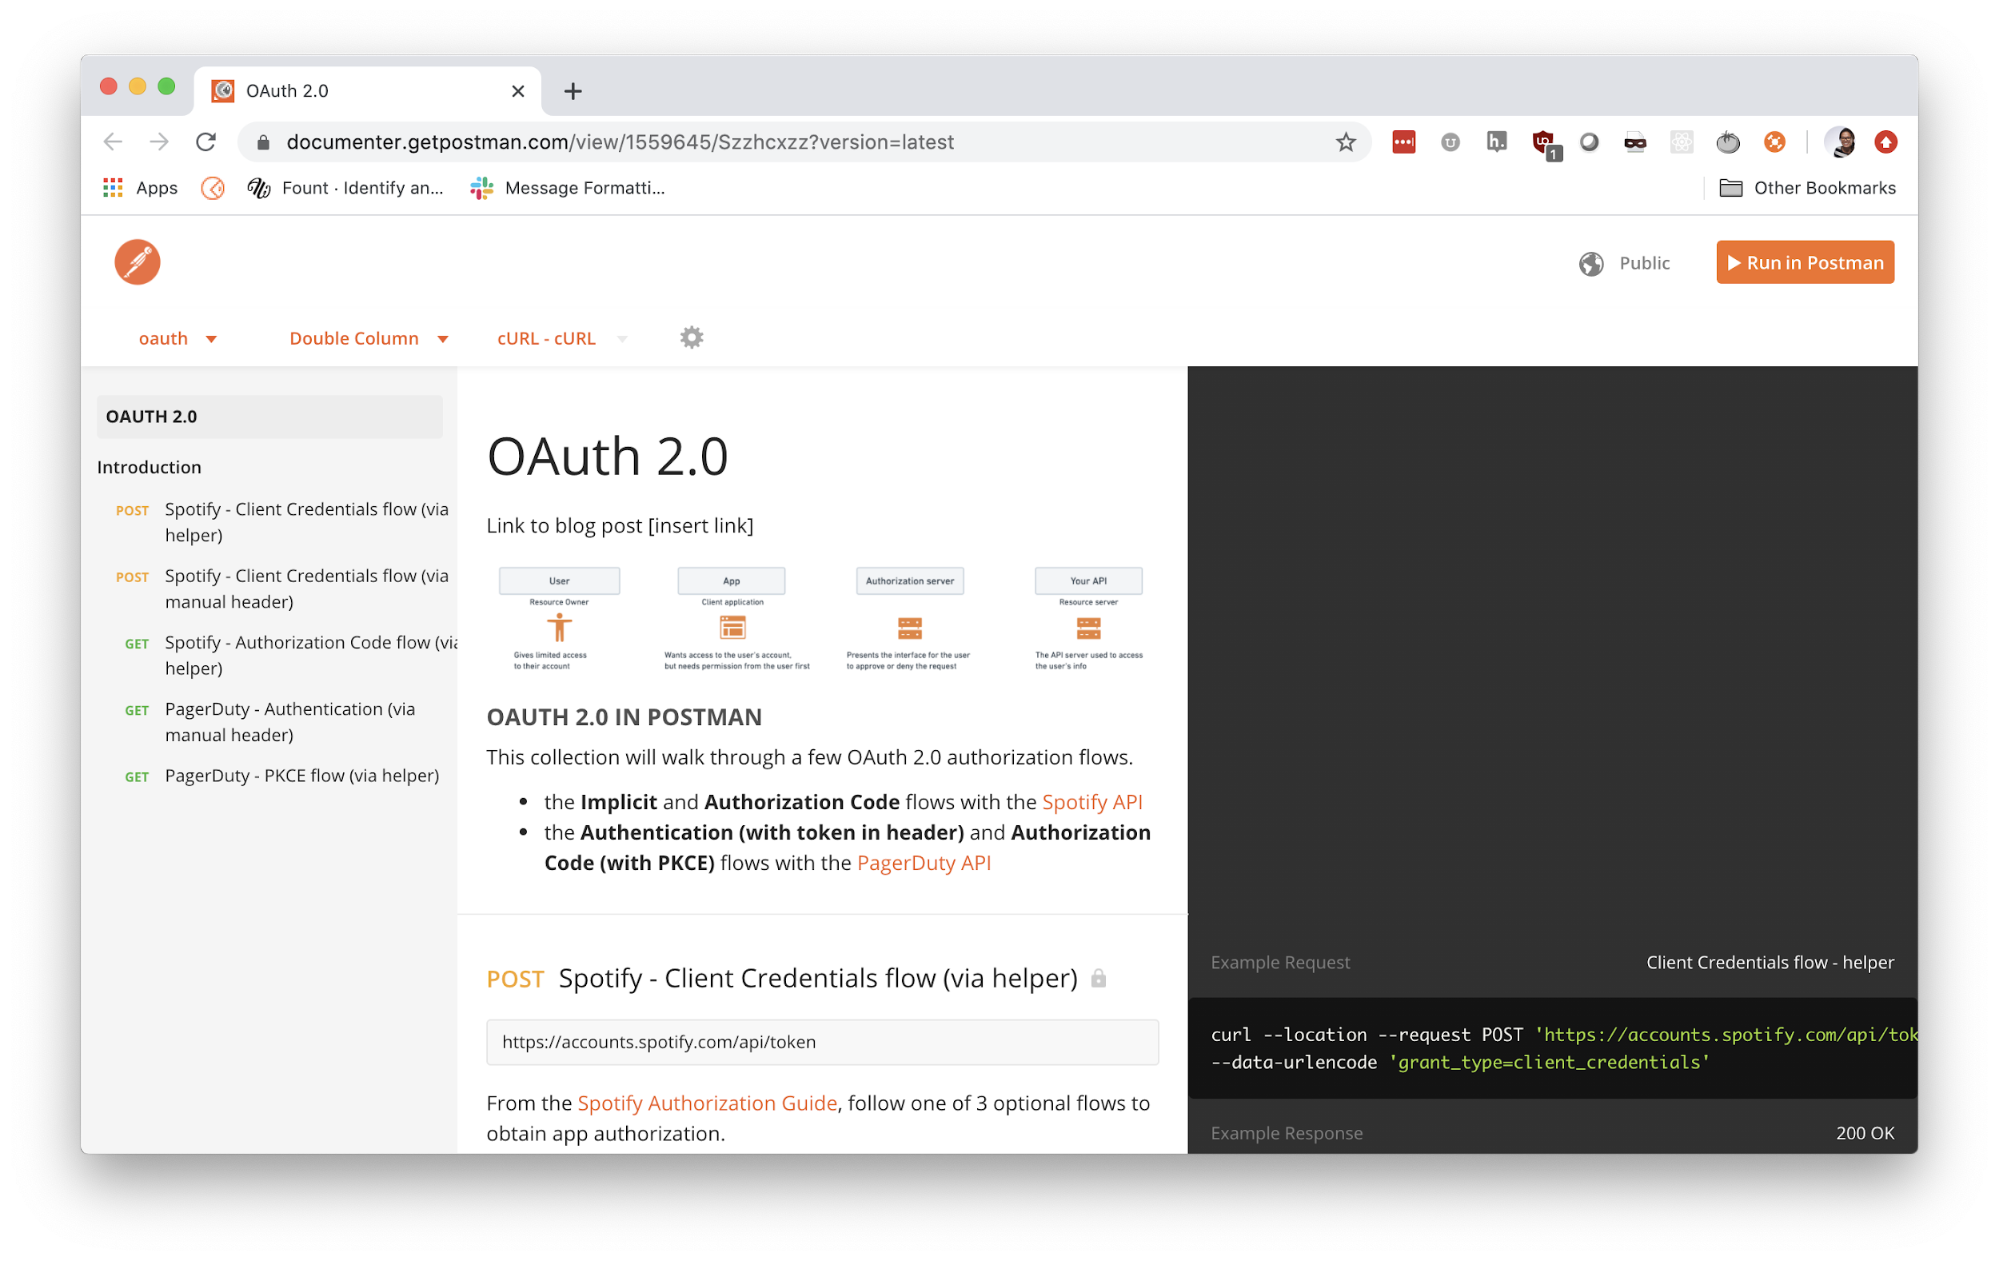 Step-by-step examples of OAuth 2.0